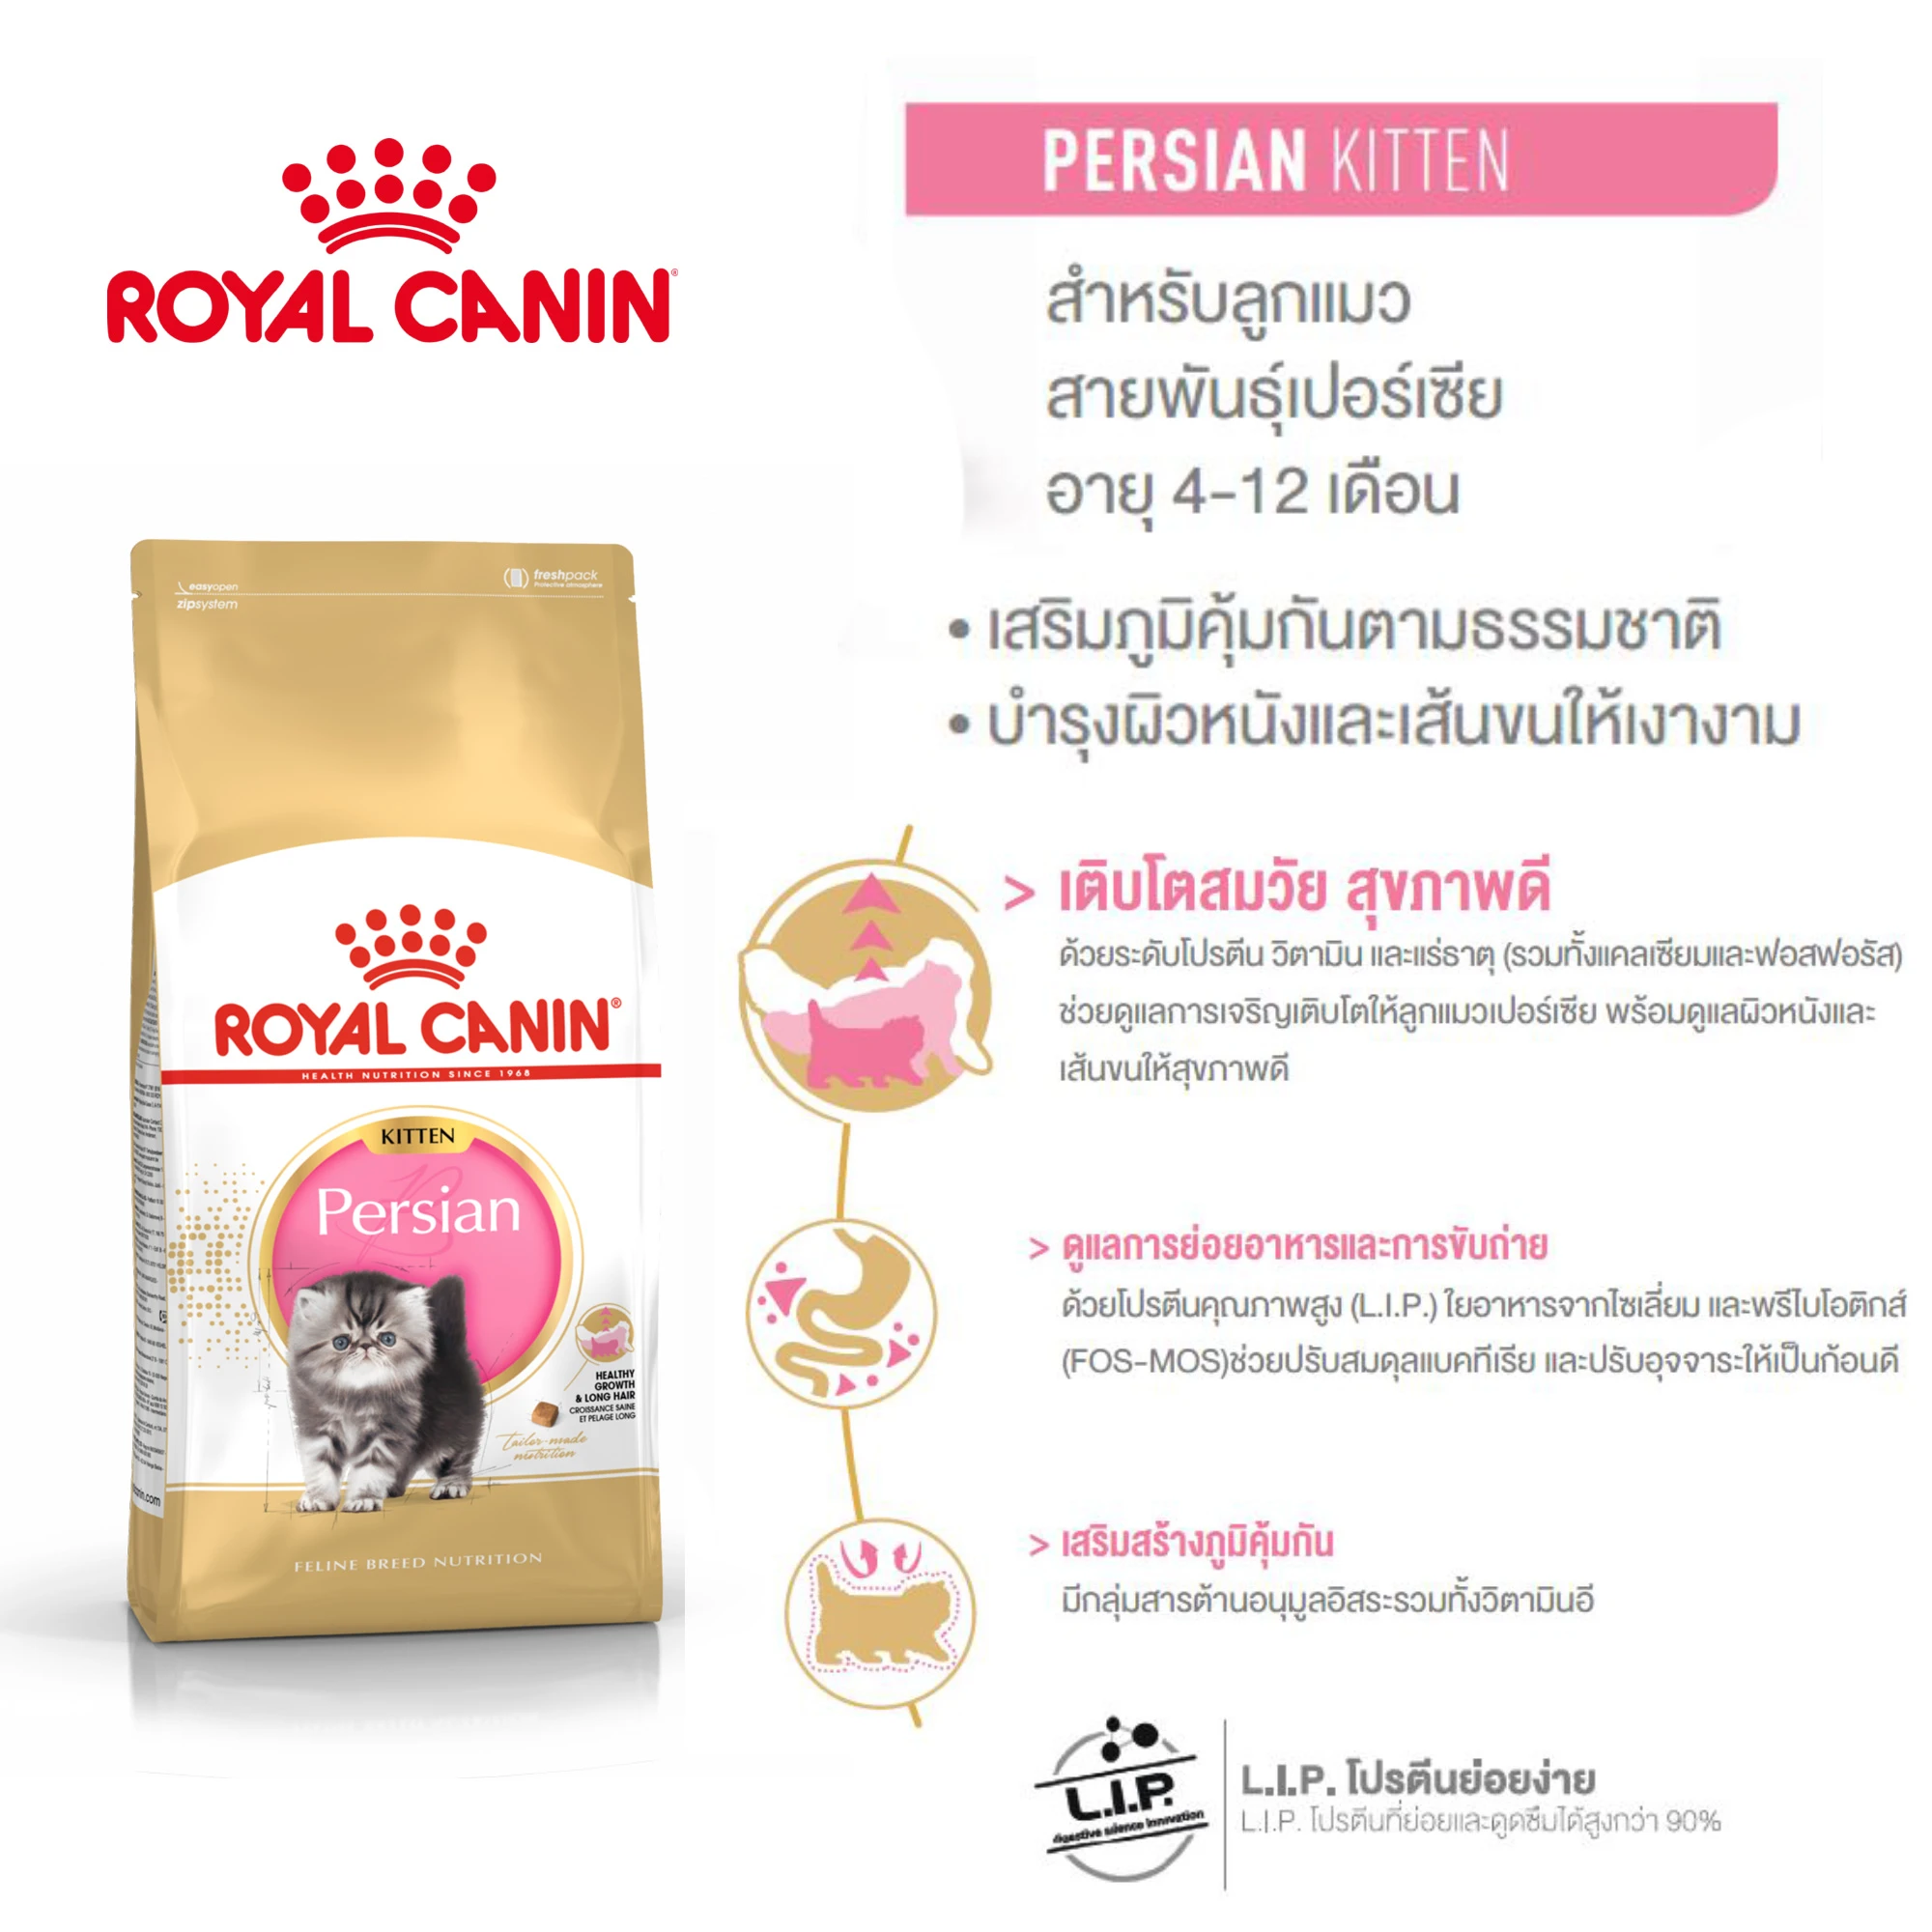 ROYAL CANIN Persian (KITTEN) Kitten food from 4 to 12 months of Persian breed.